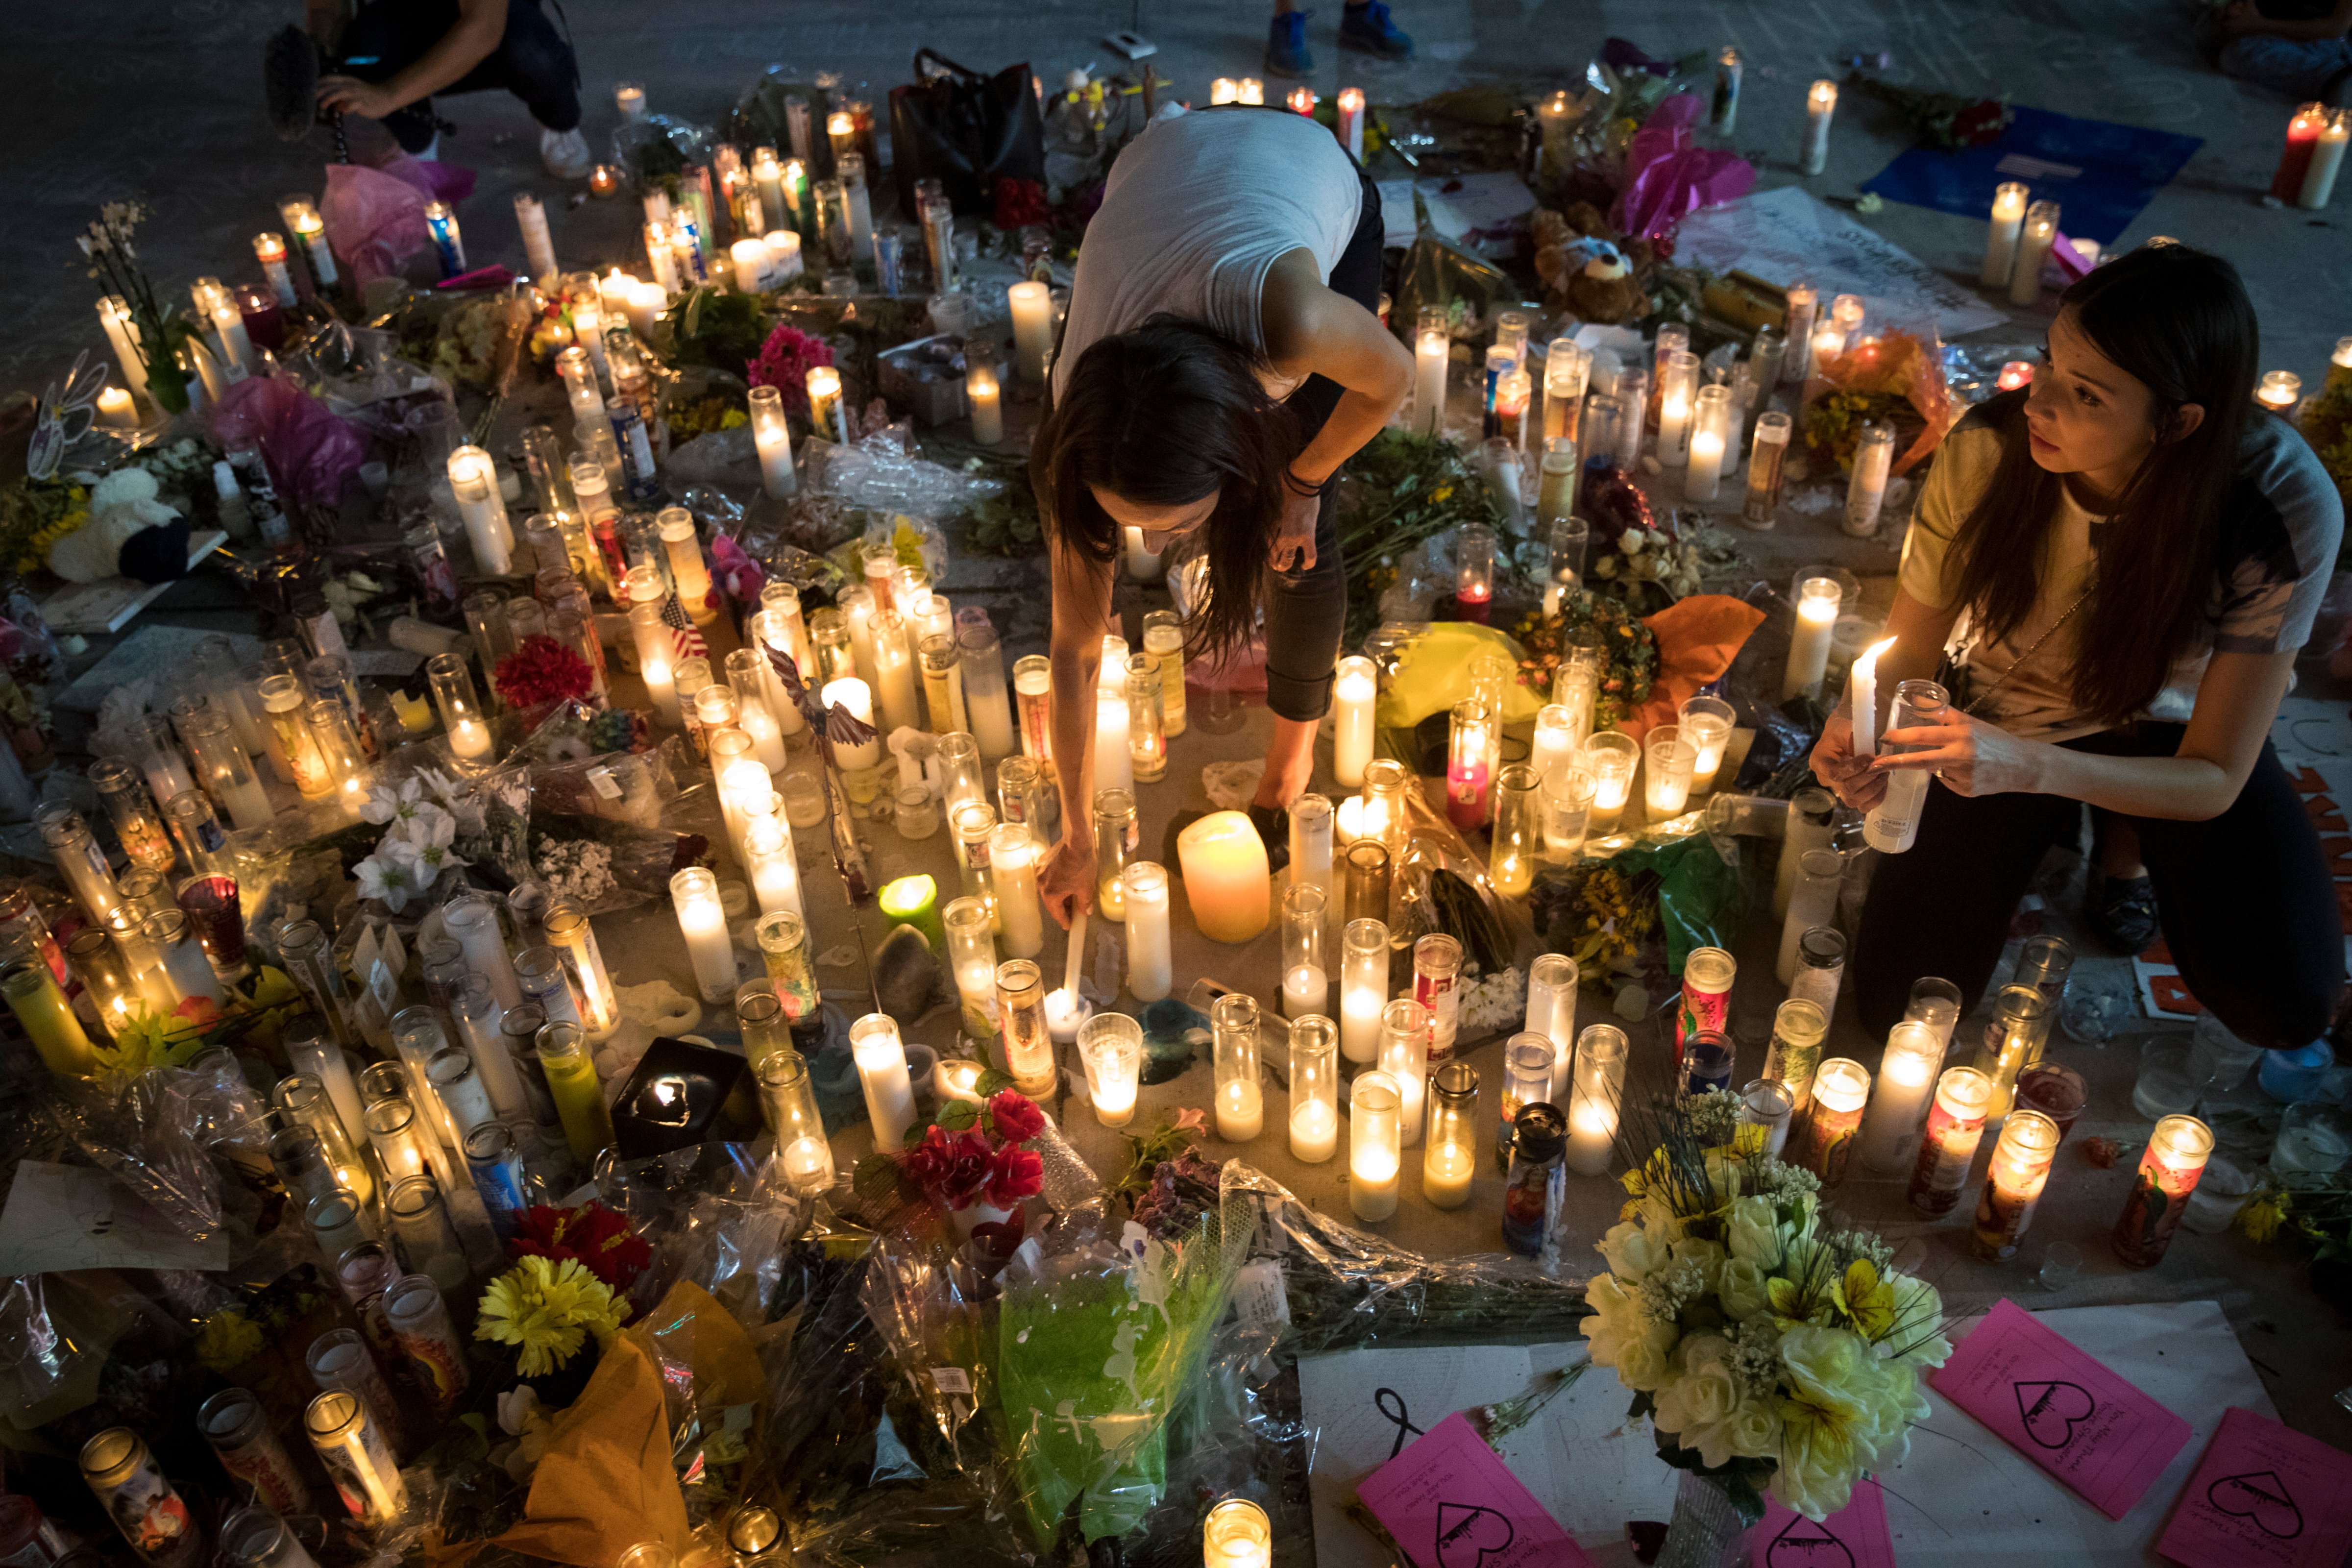 Las Vegas residents Elisabeth Apcar and Dashenka Giraldo light candles at a the makeshift memorial at the northern end of the Last Vegas Strip, October 4, 2017 in Las Vegas, Nevada. (Drew Angerer—Getty Images)